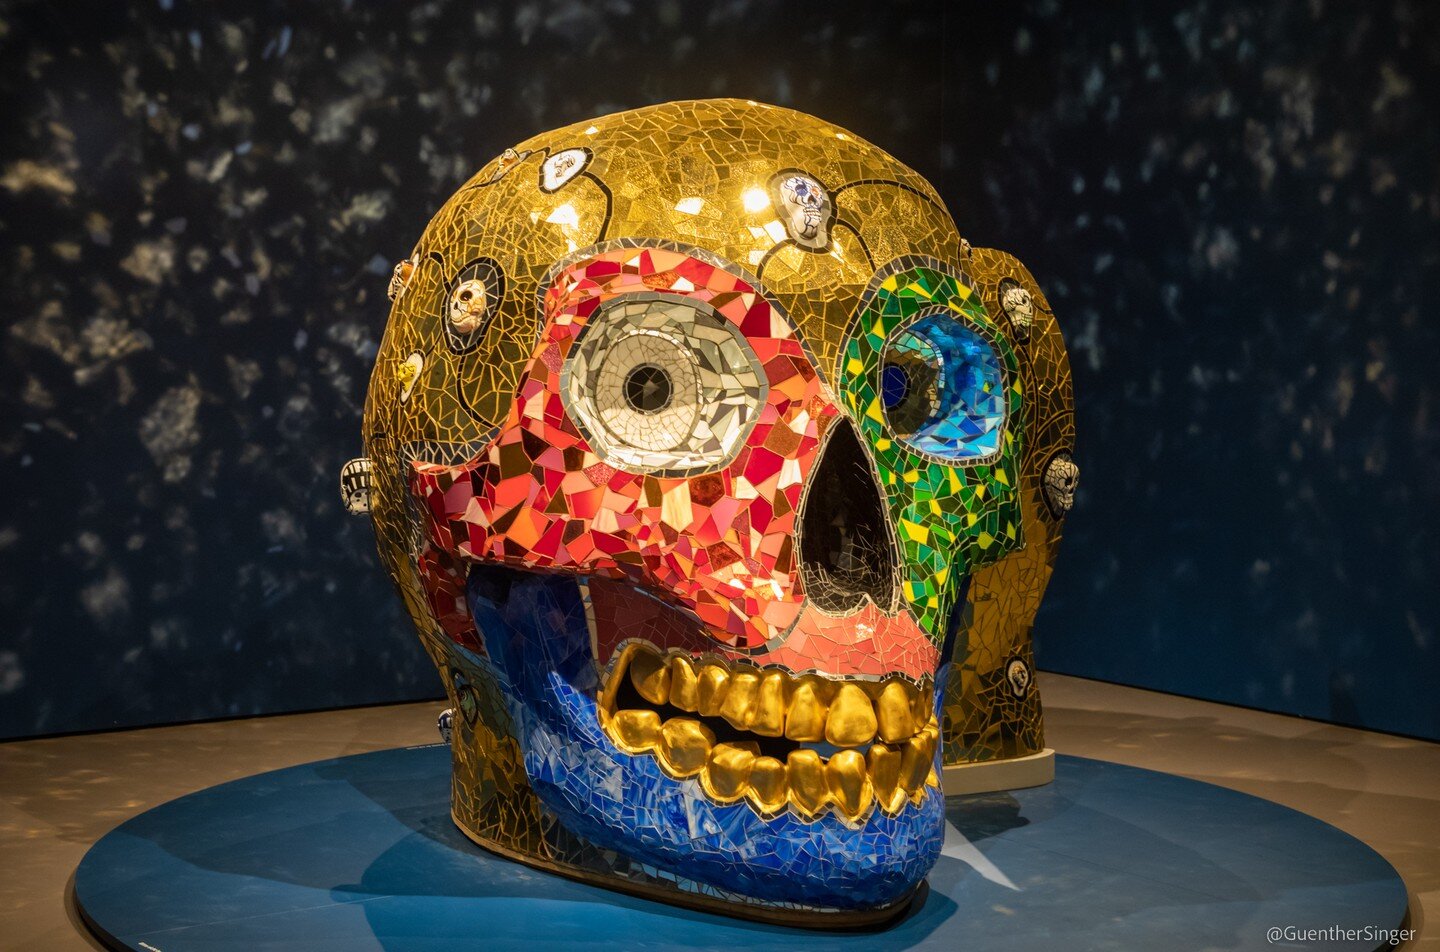 Can you find the Meditation Room? What will you find in it?

Niki De Saint Phalle, Skull Meditation Room, 1990 
The Kunsthaus in Zurich has a special exhibition spanning the artist's life. 

@kunsthauszuerich #nikidesaintphalle #leica #leicasociety #